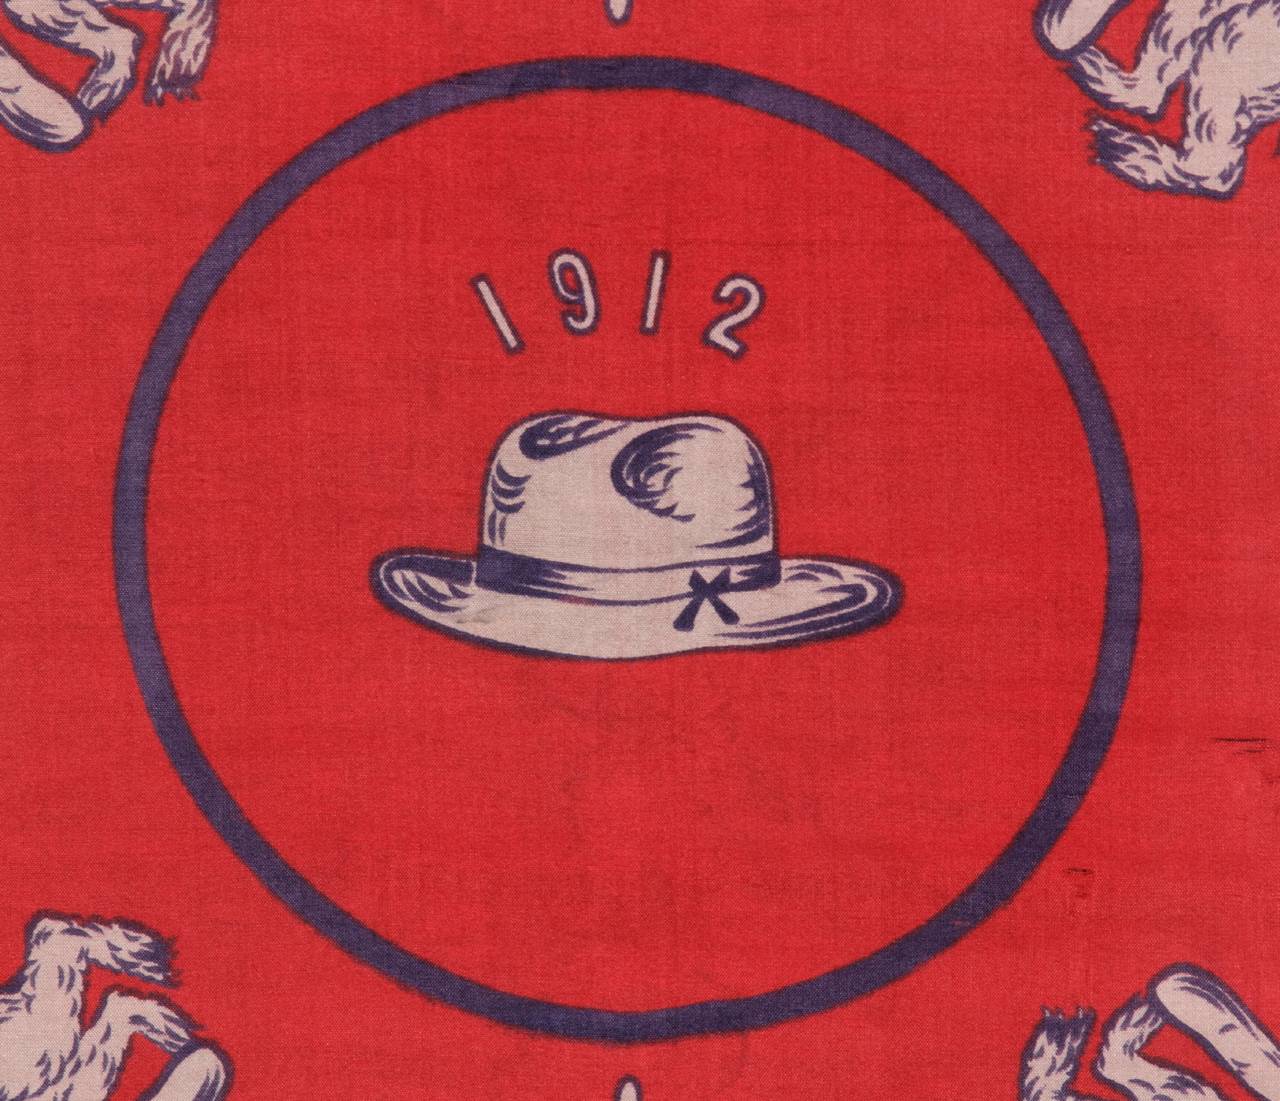 Early 20th Century 1912 Silk Campaign Kerchief Made to Promote Teddy Roosevelt